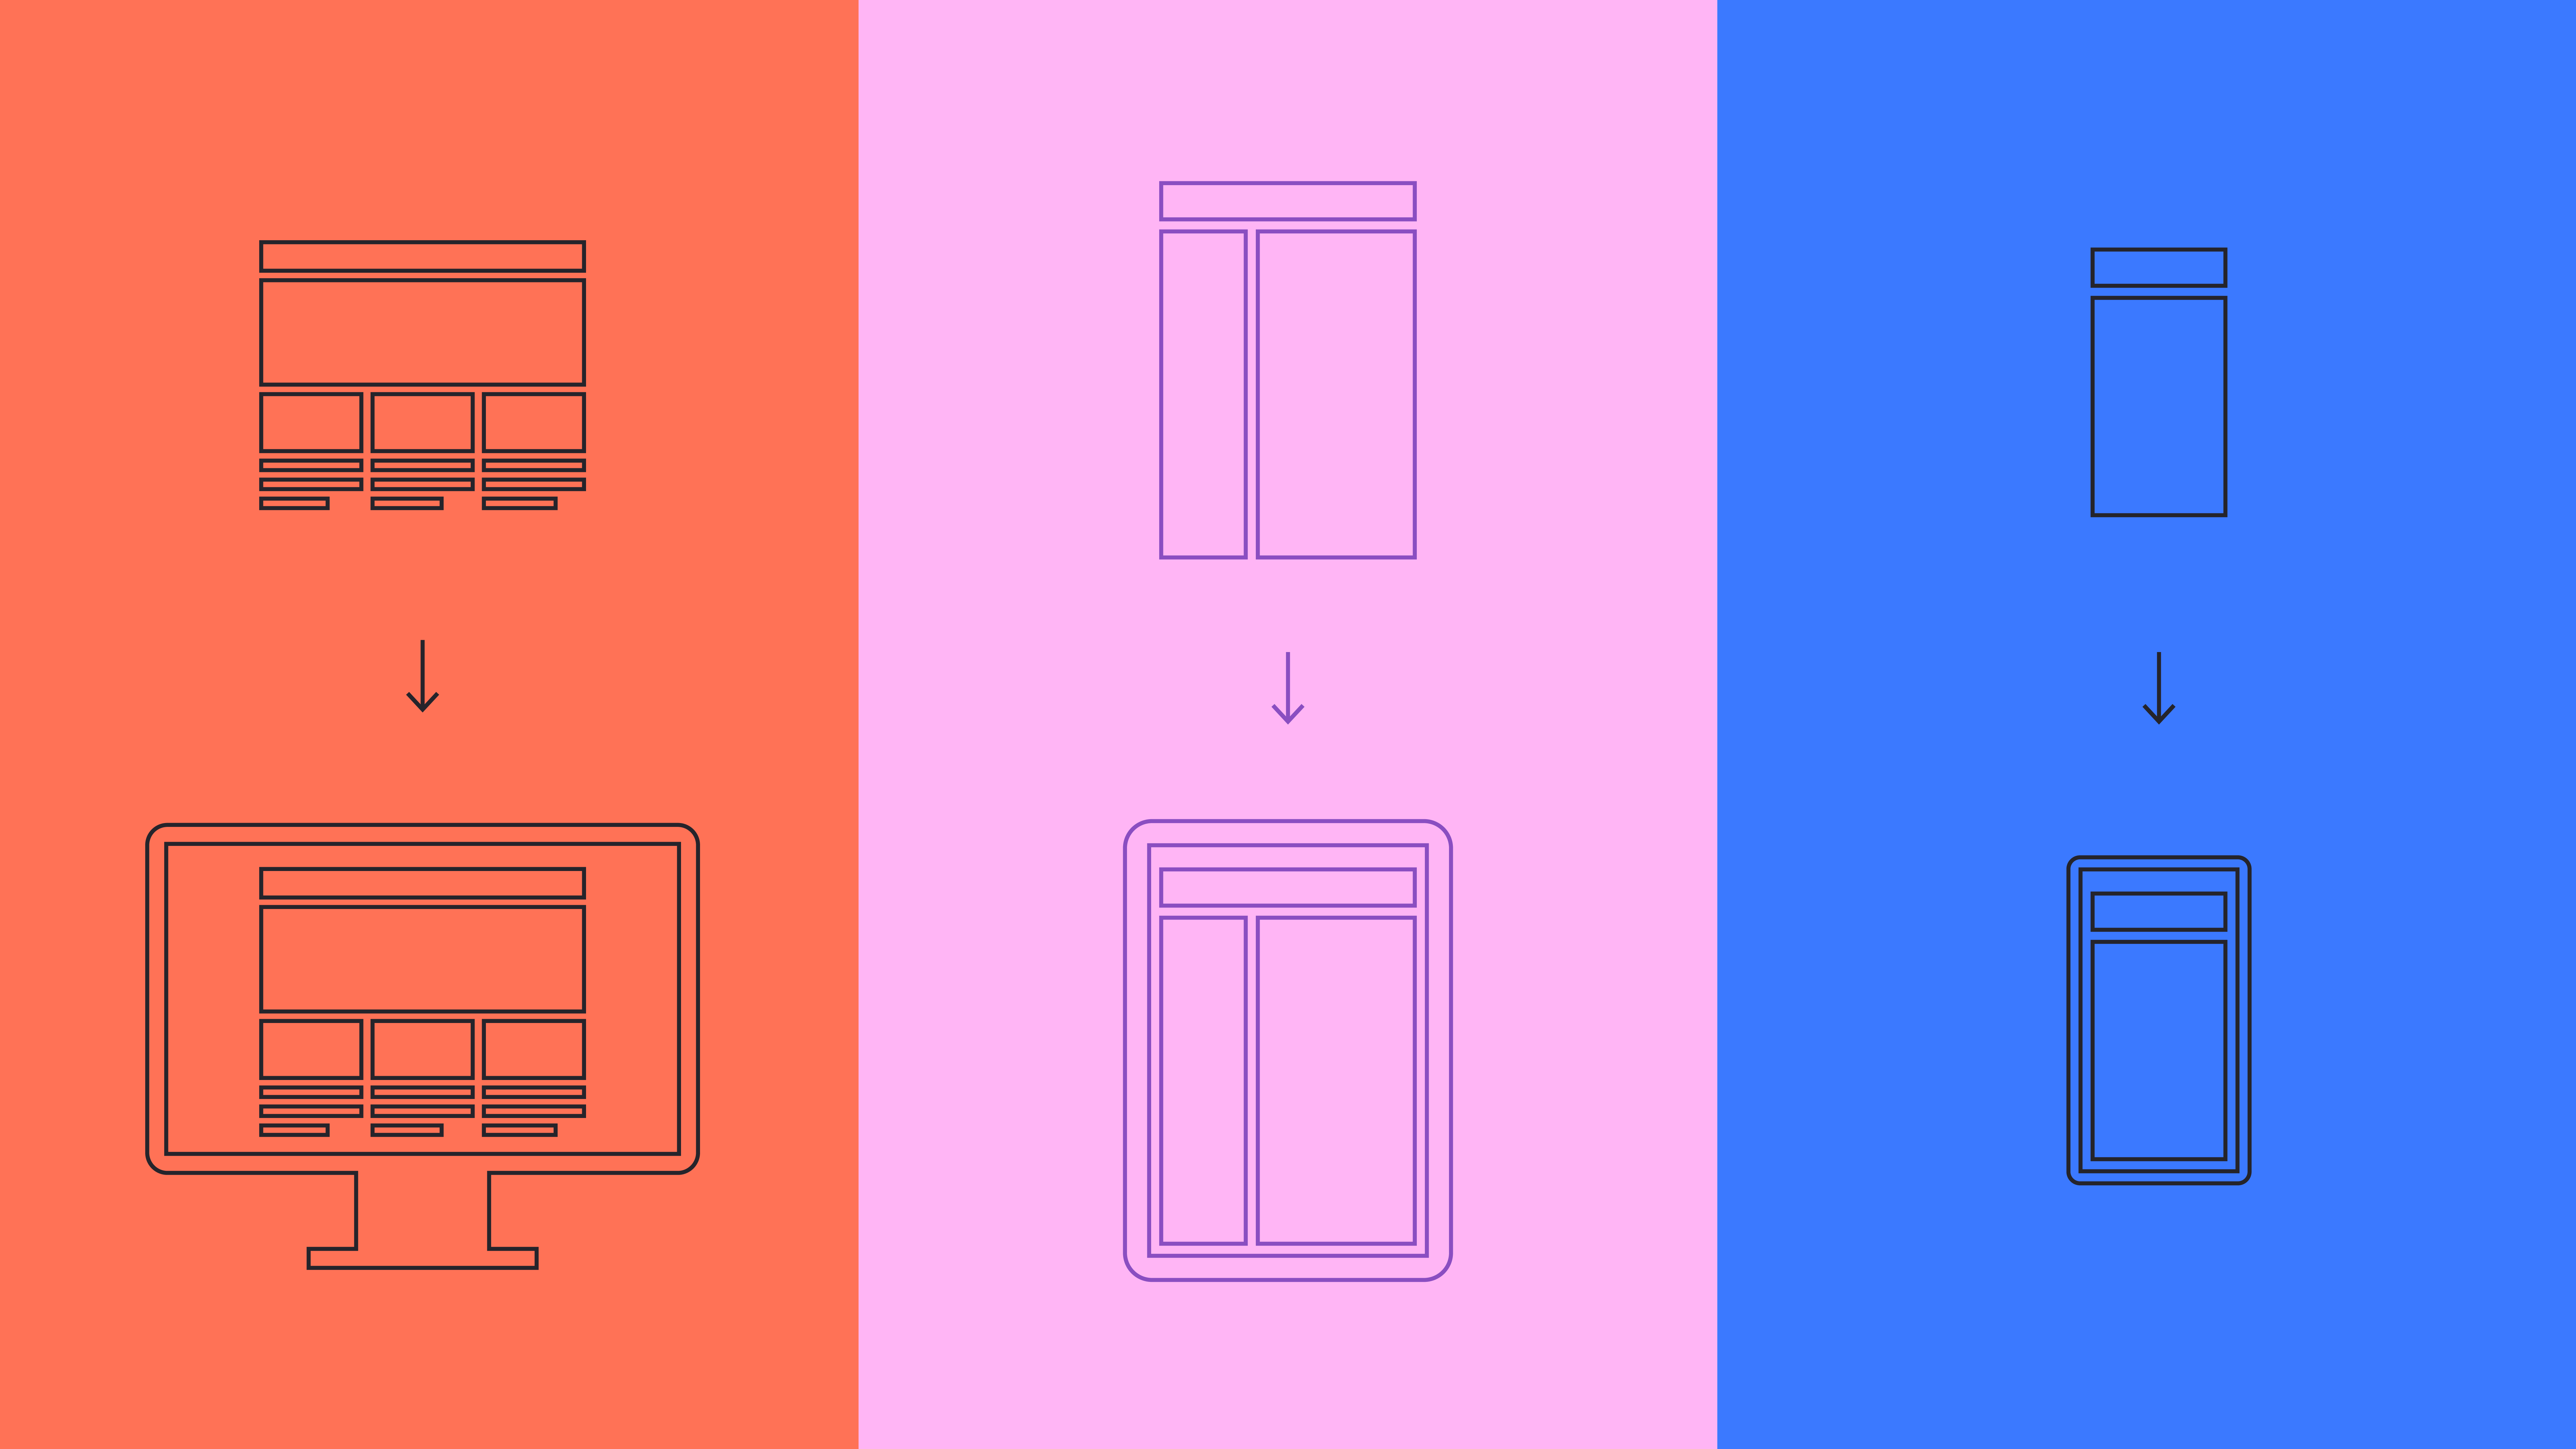 Illustrated example of adaptive design layoutes for different screen sizes